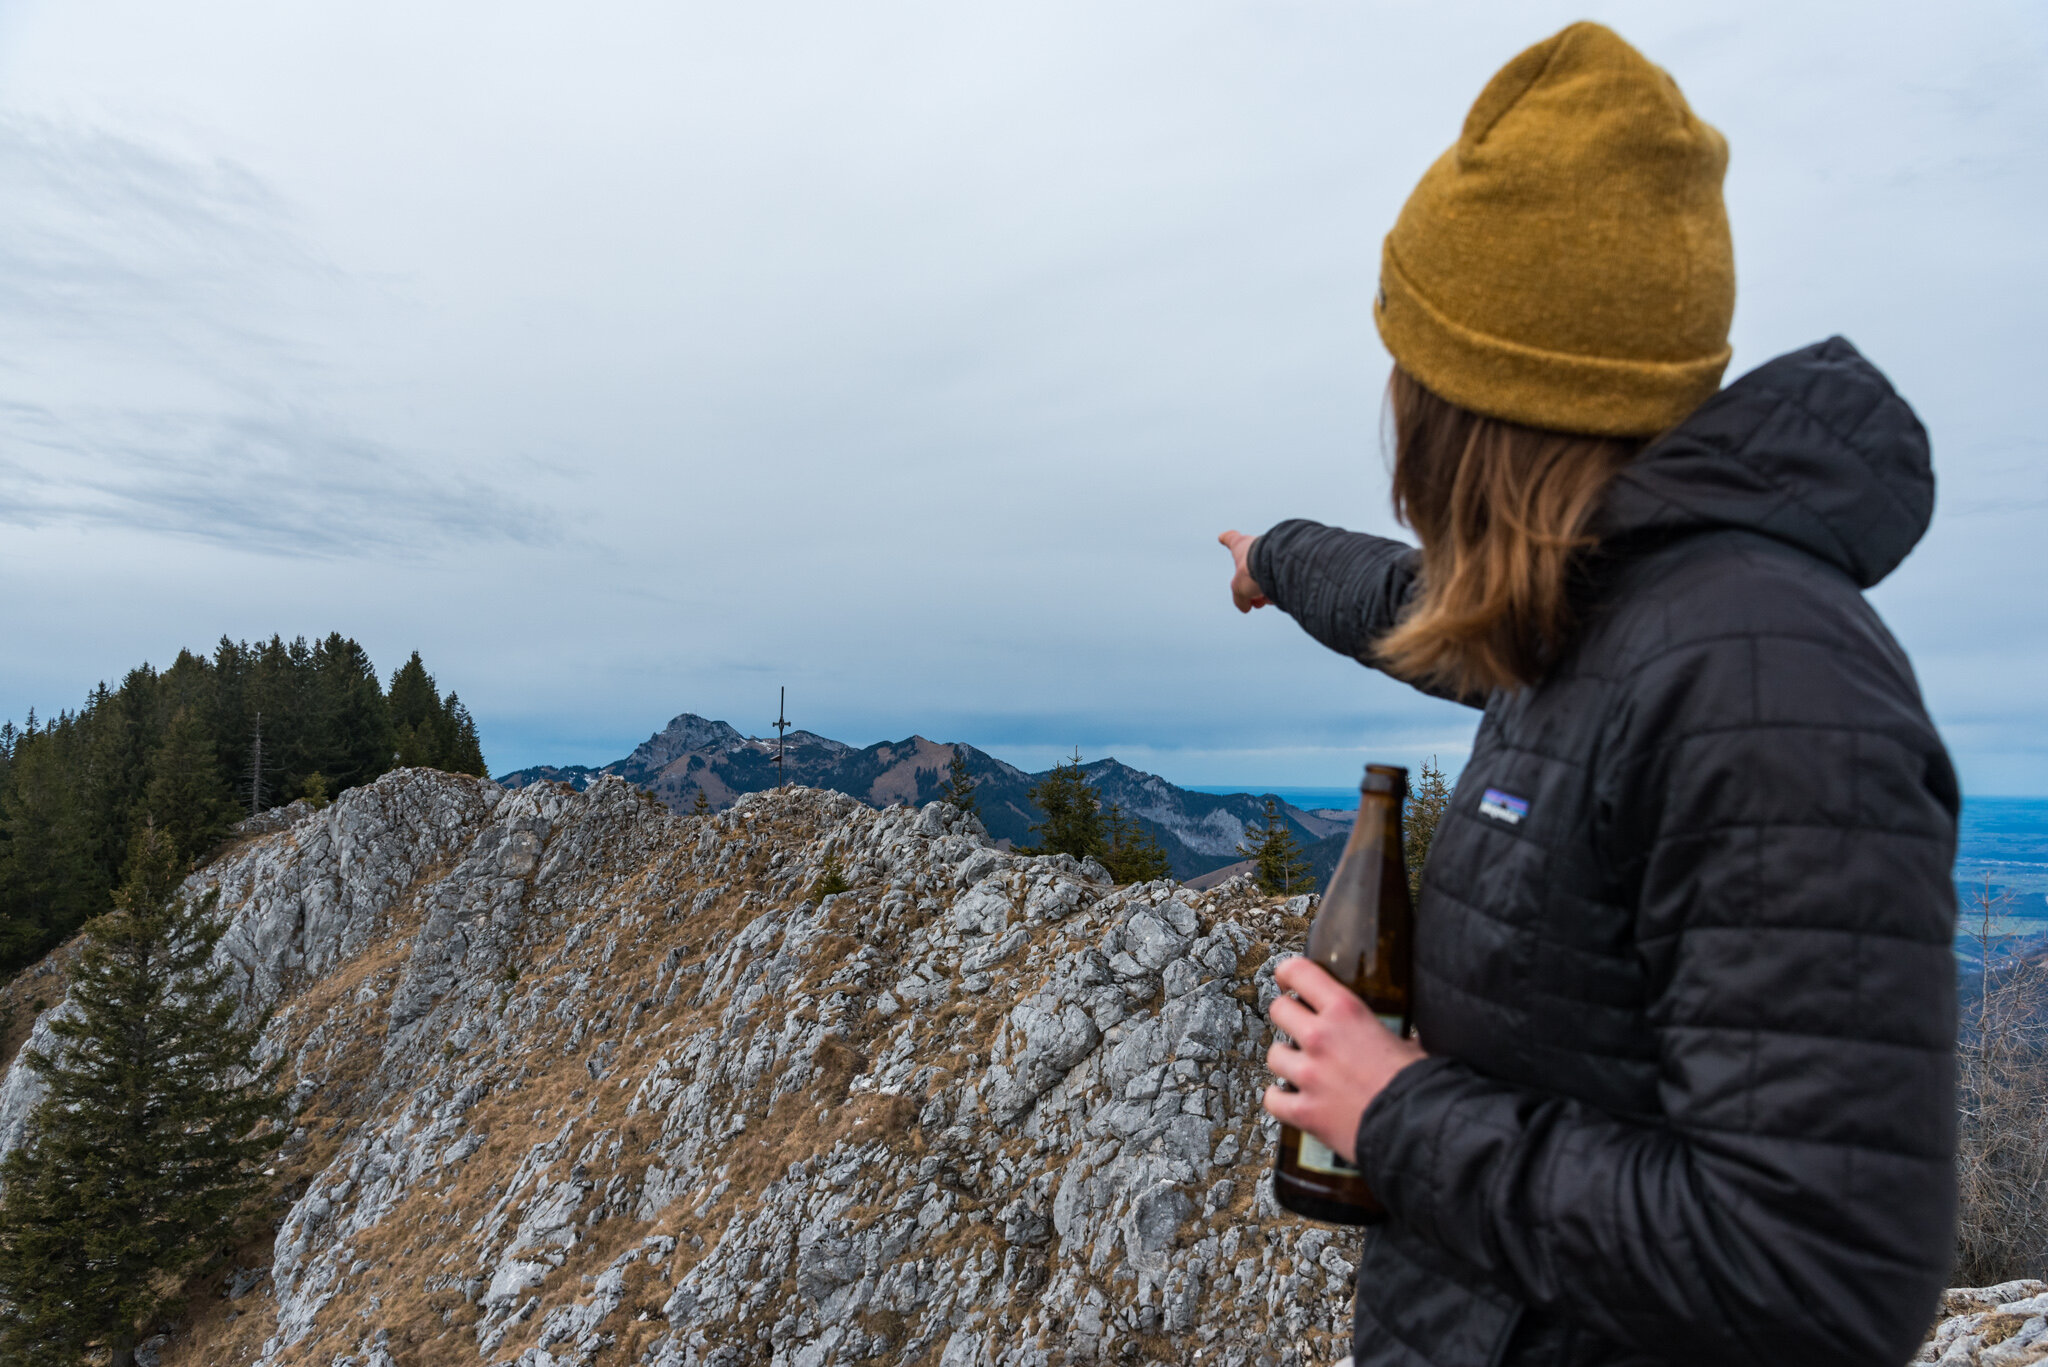 Pointing out Wendelstein and Wildalpjoch in the distance.